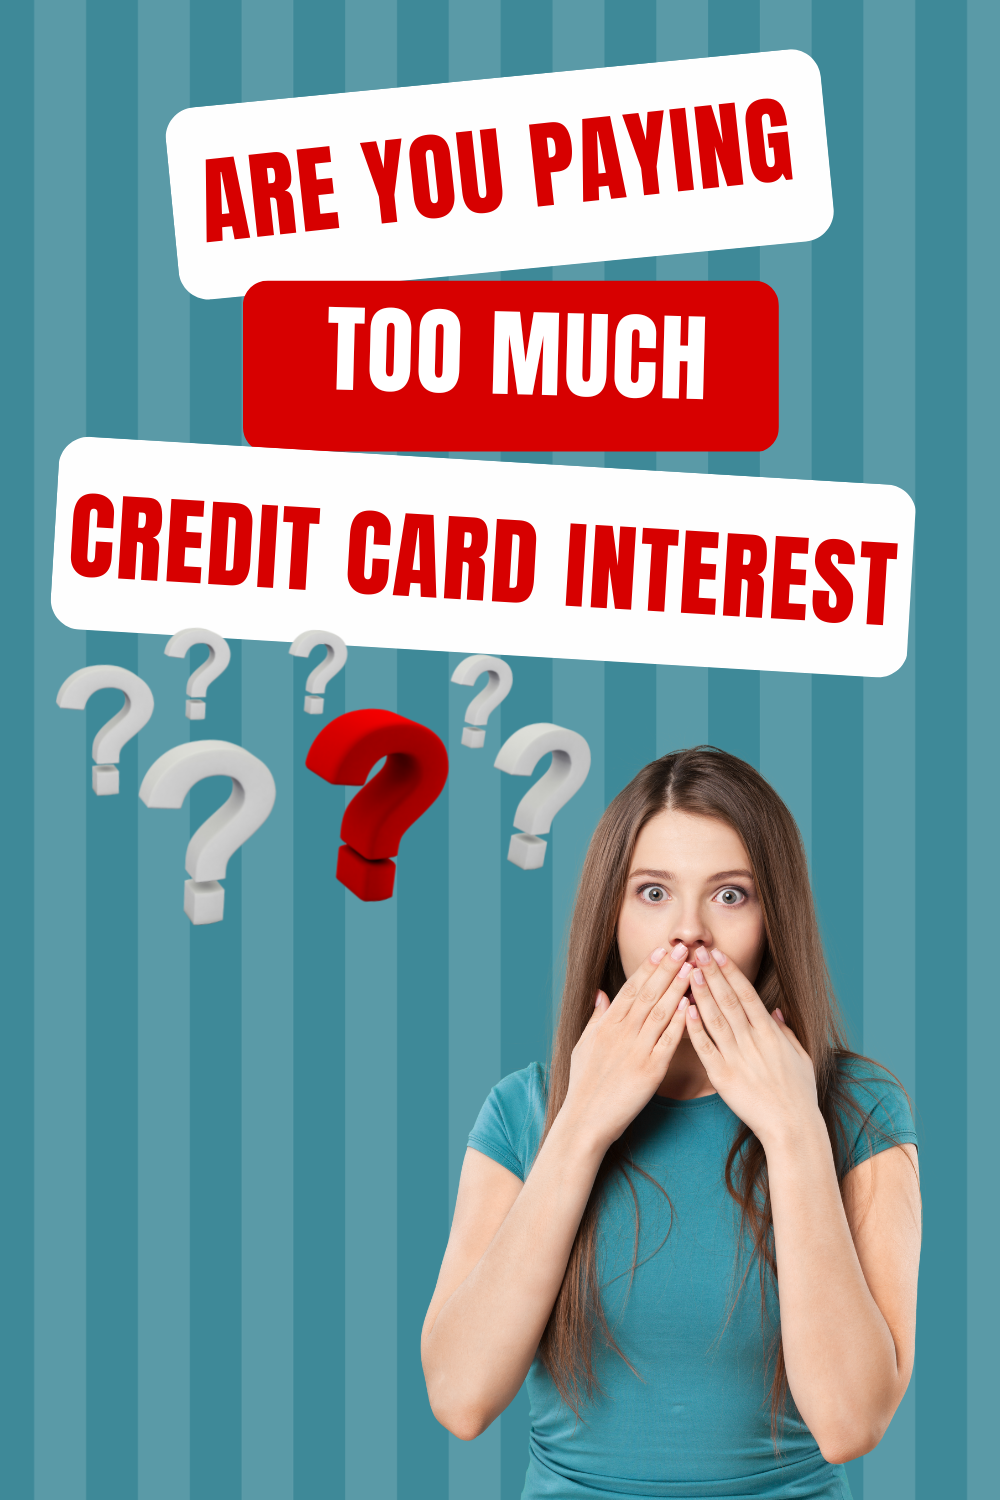 Are You Paying Too Much Credit Card Interest